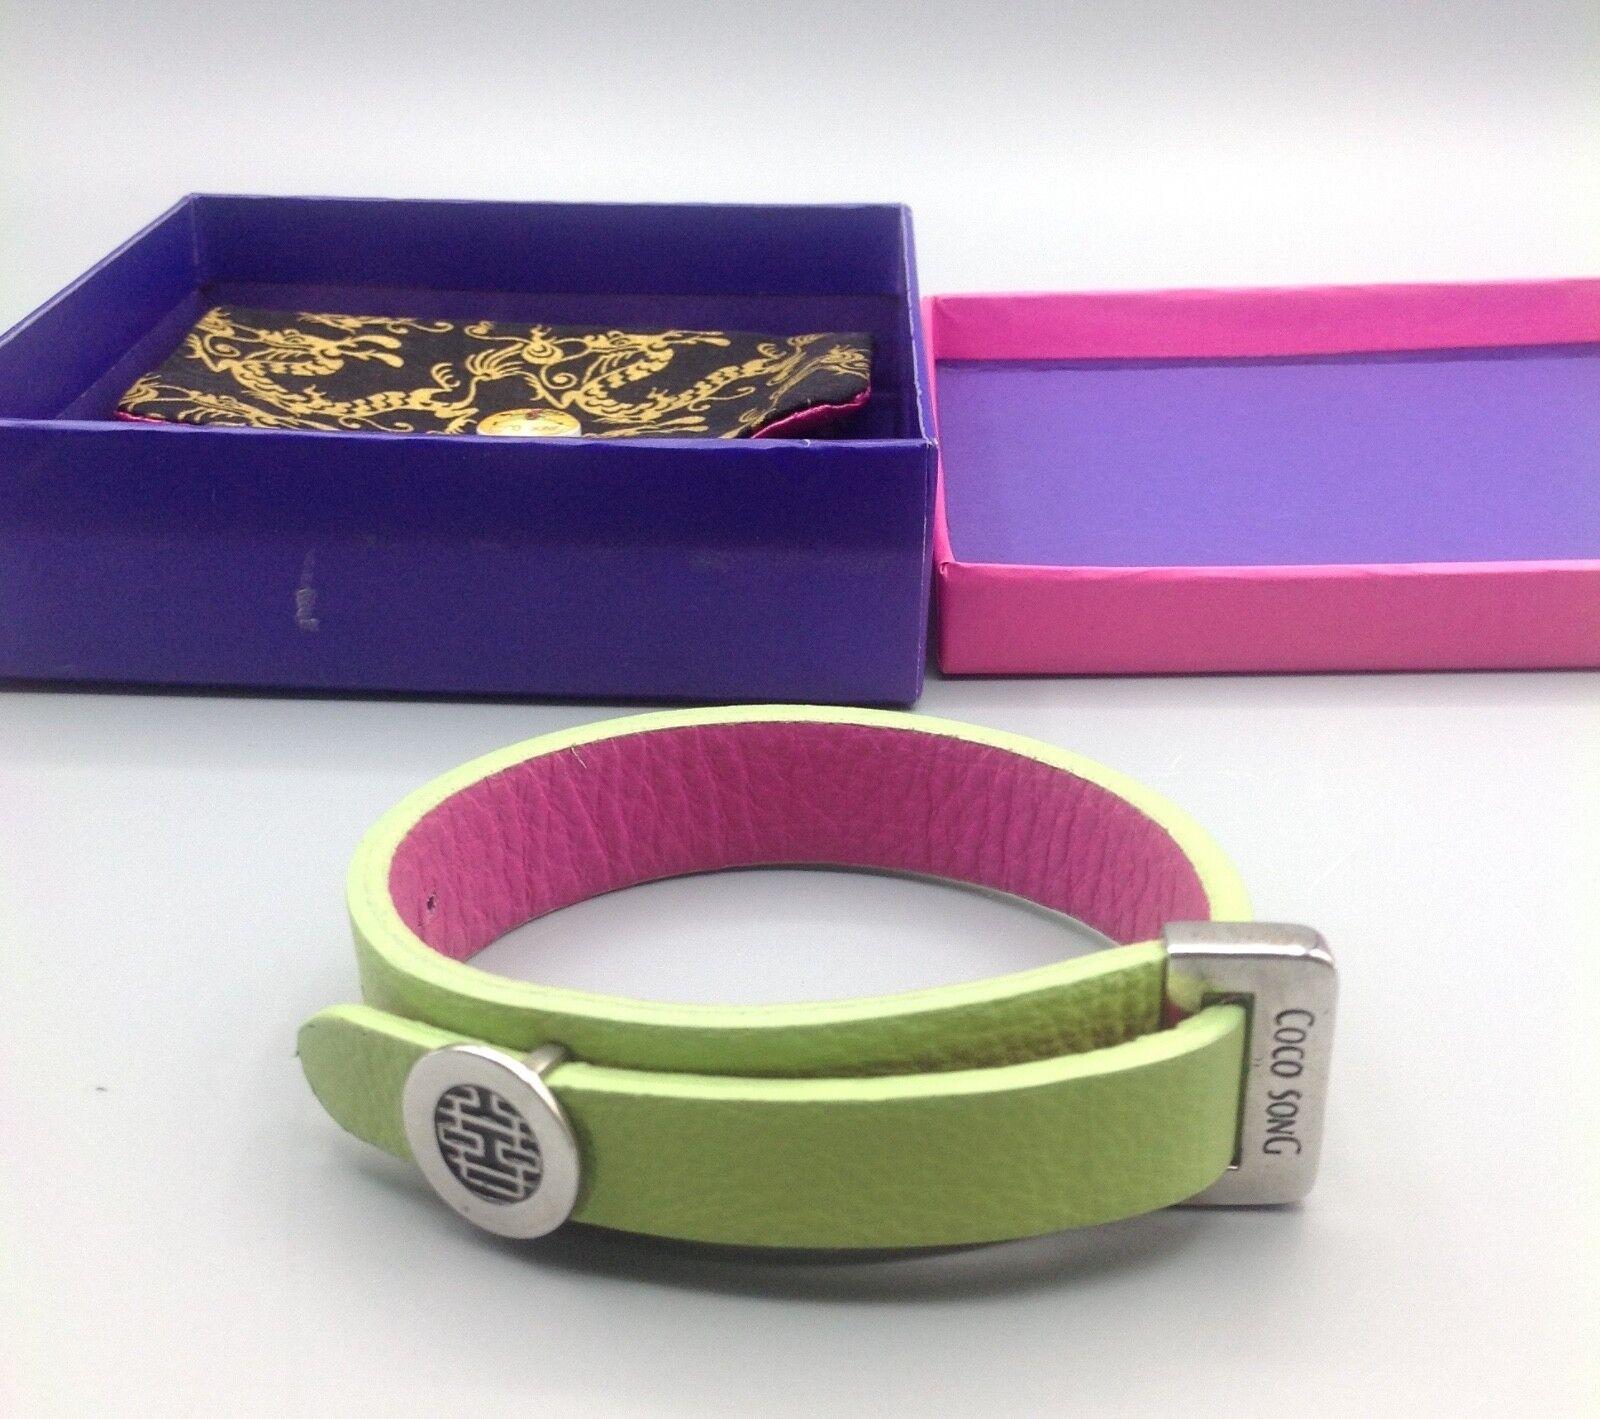 Bracciale Coco Song Bracelet Coco Song green violet leather with silver studs